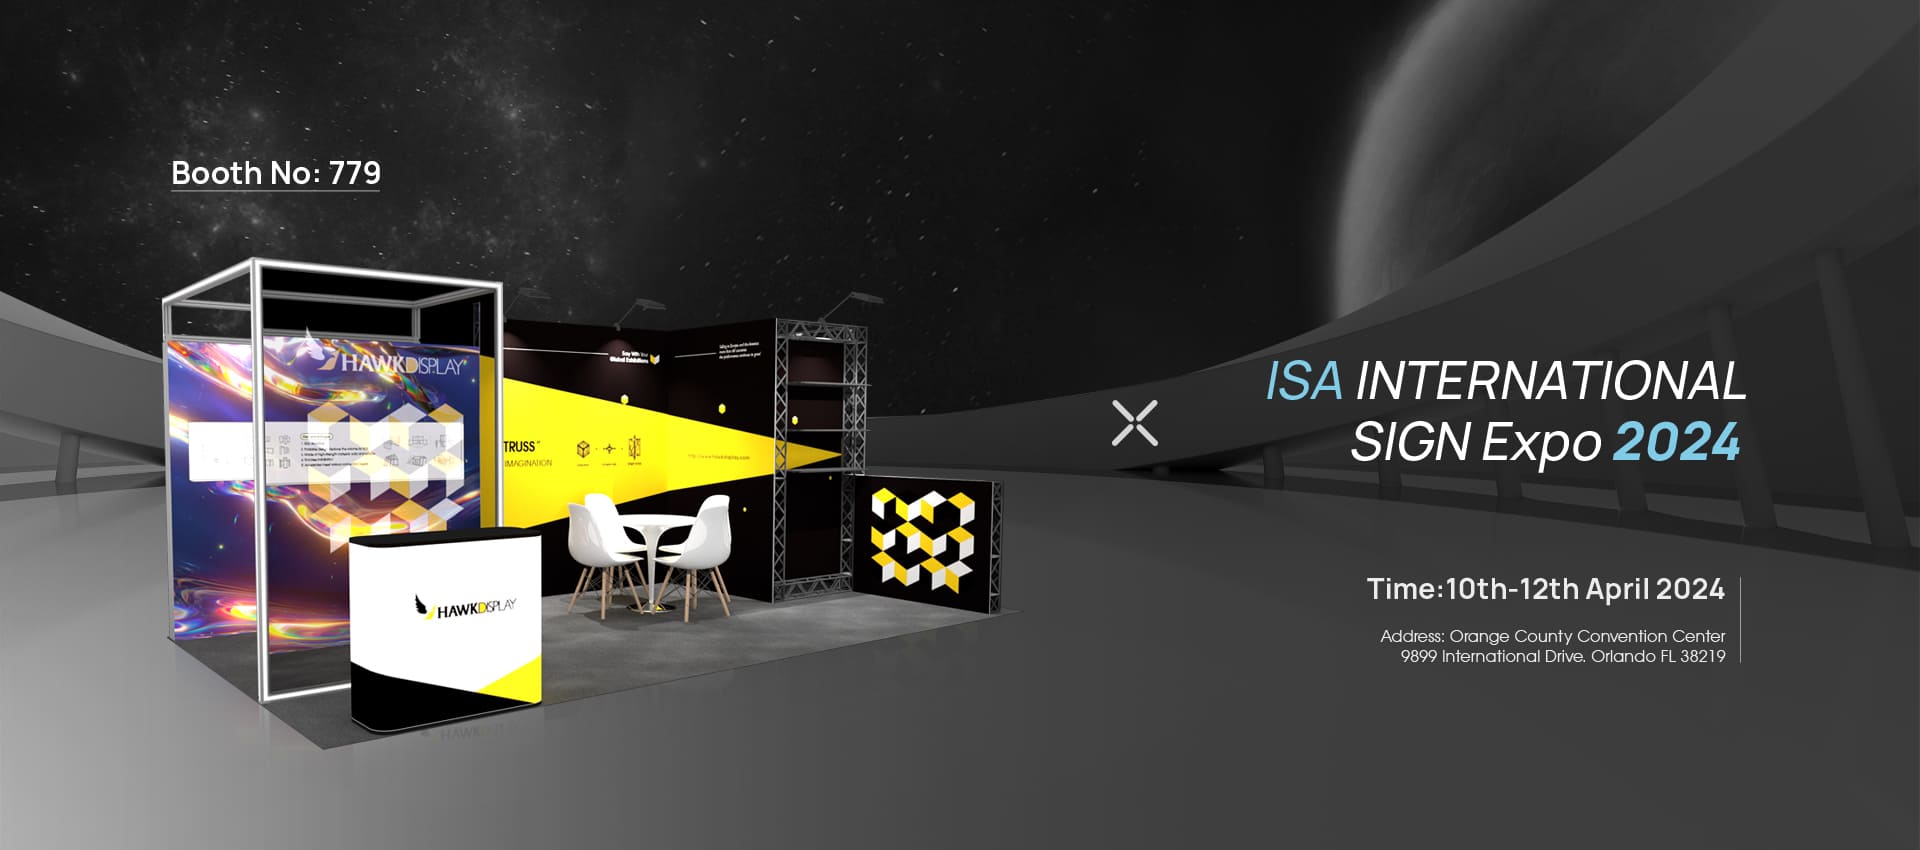 Booth No 779: Welcome to ISA 2024